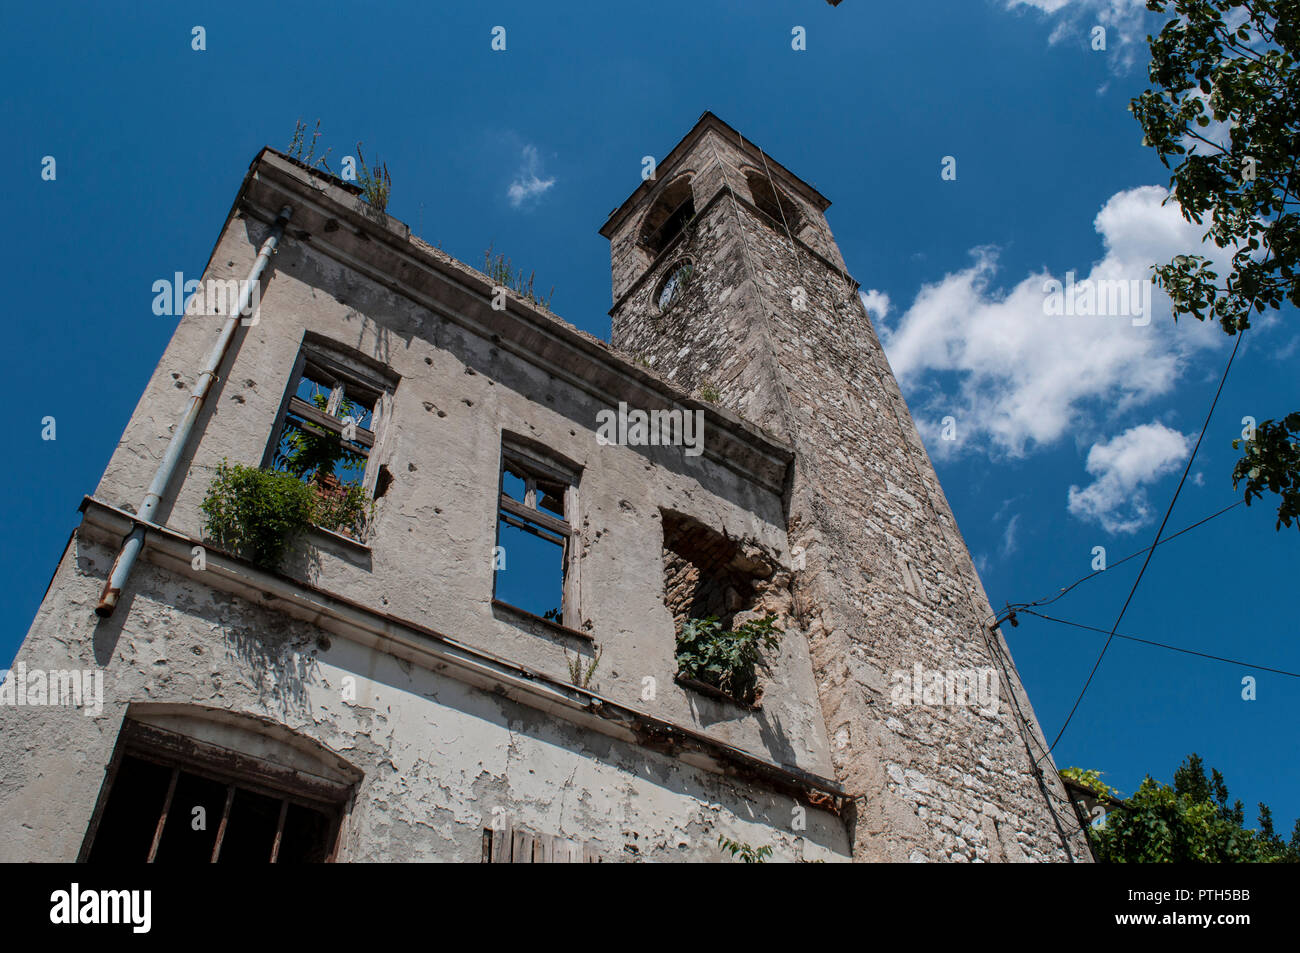 Mostar: the Clock Tower (Sahat Kula), important example of the proliﬁc Ottoman period, dated 1630, bombed and damaged in the Bosnian War (1992-1995) Stock Photo